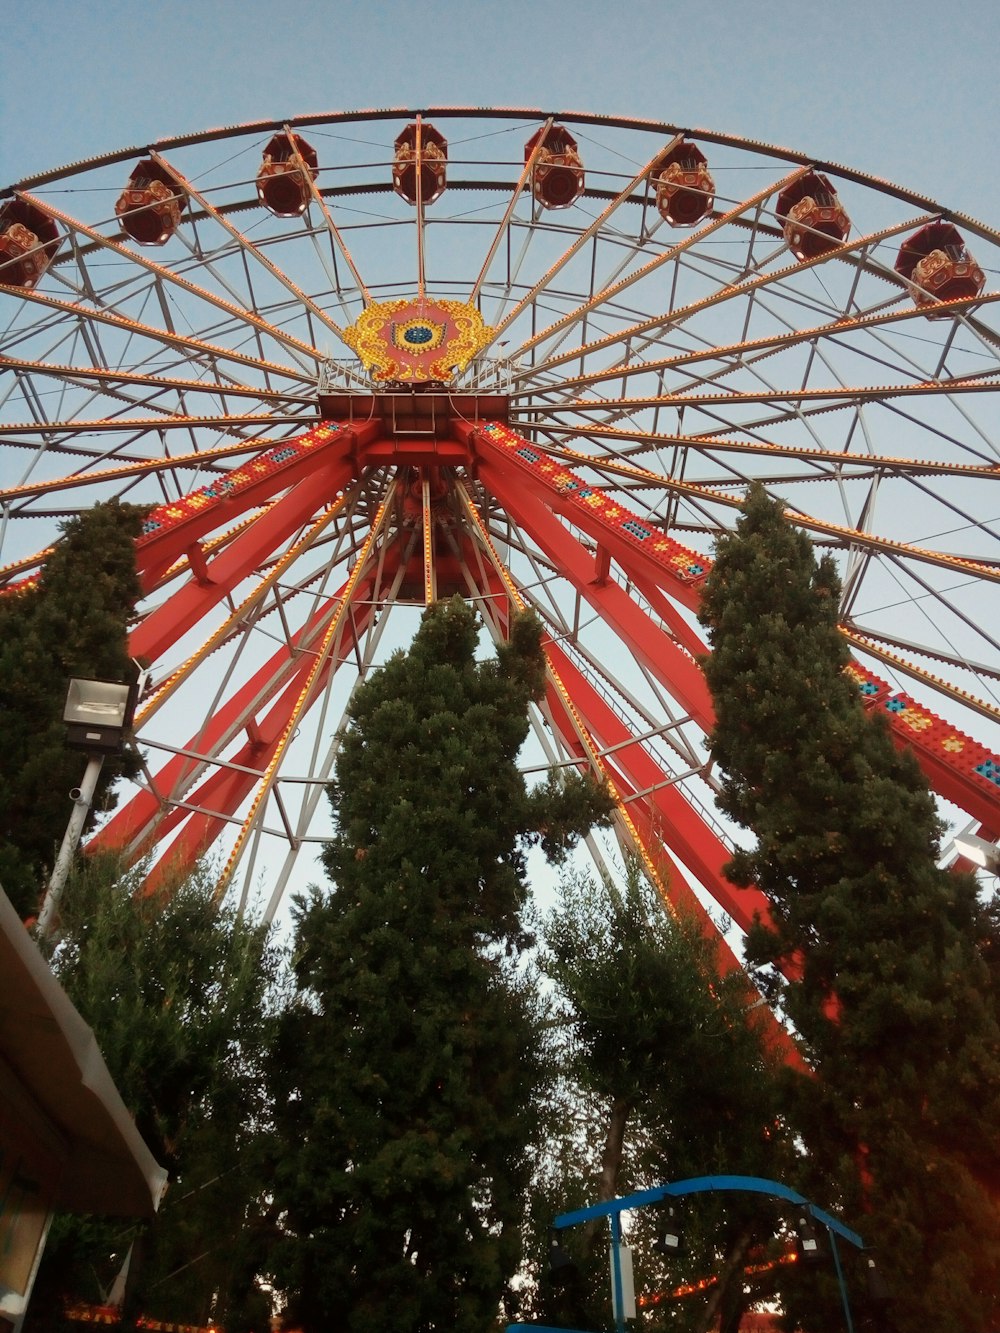 a large ferris wheel in a park with trees